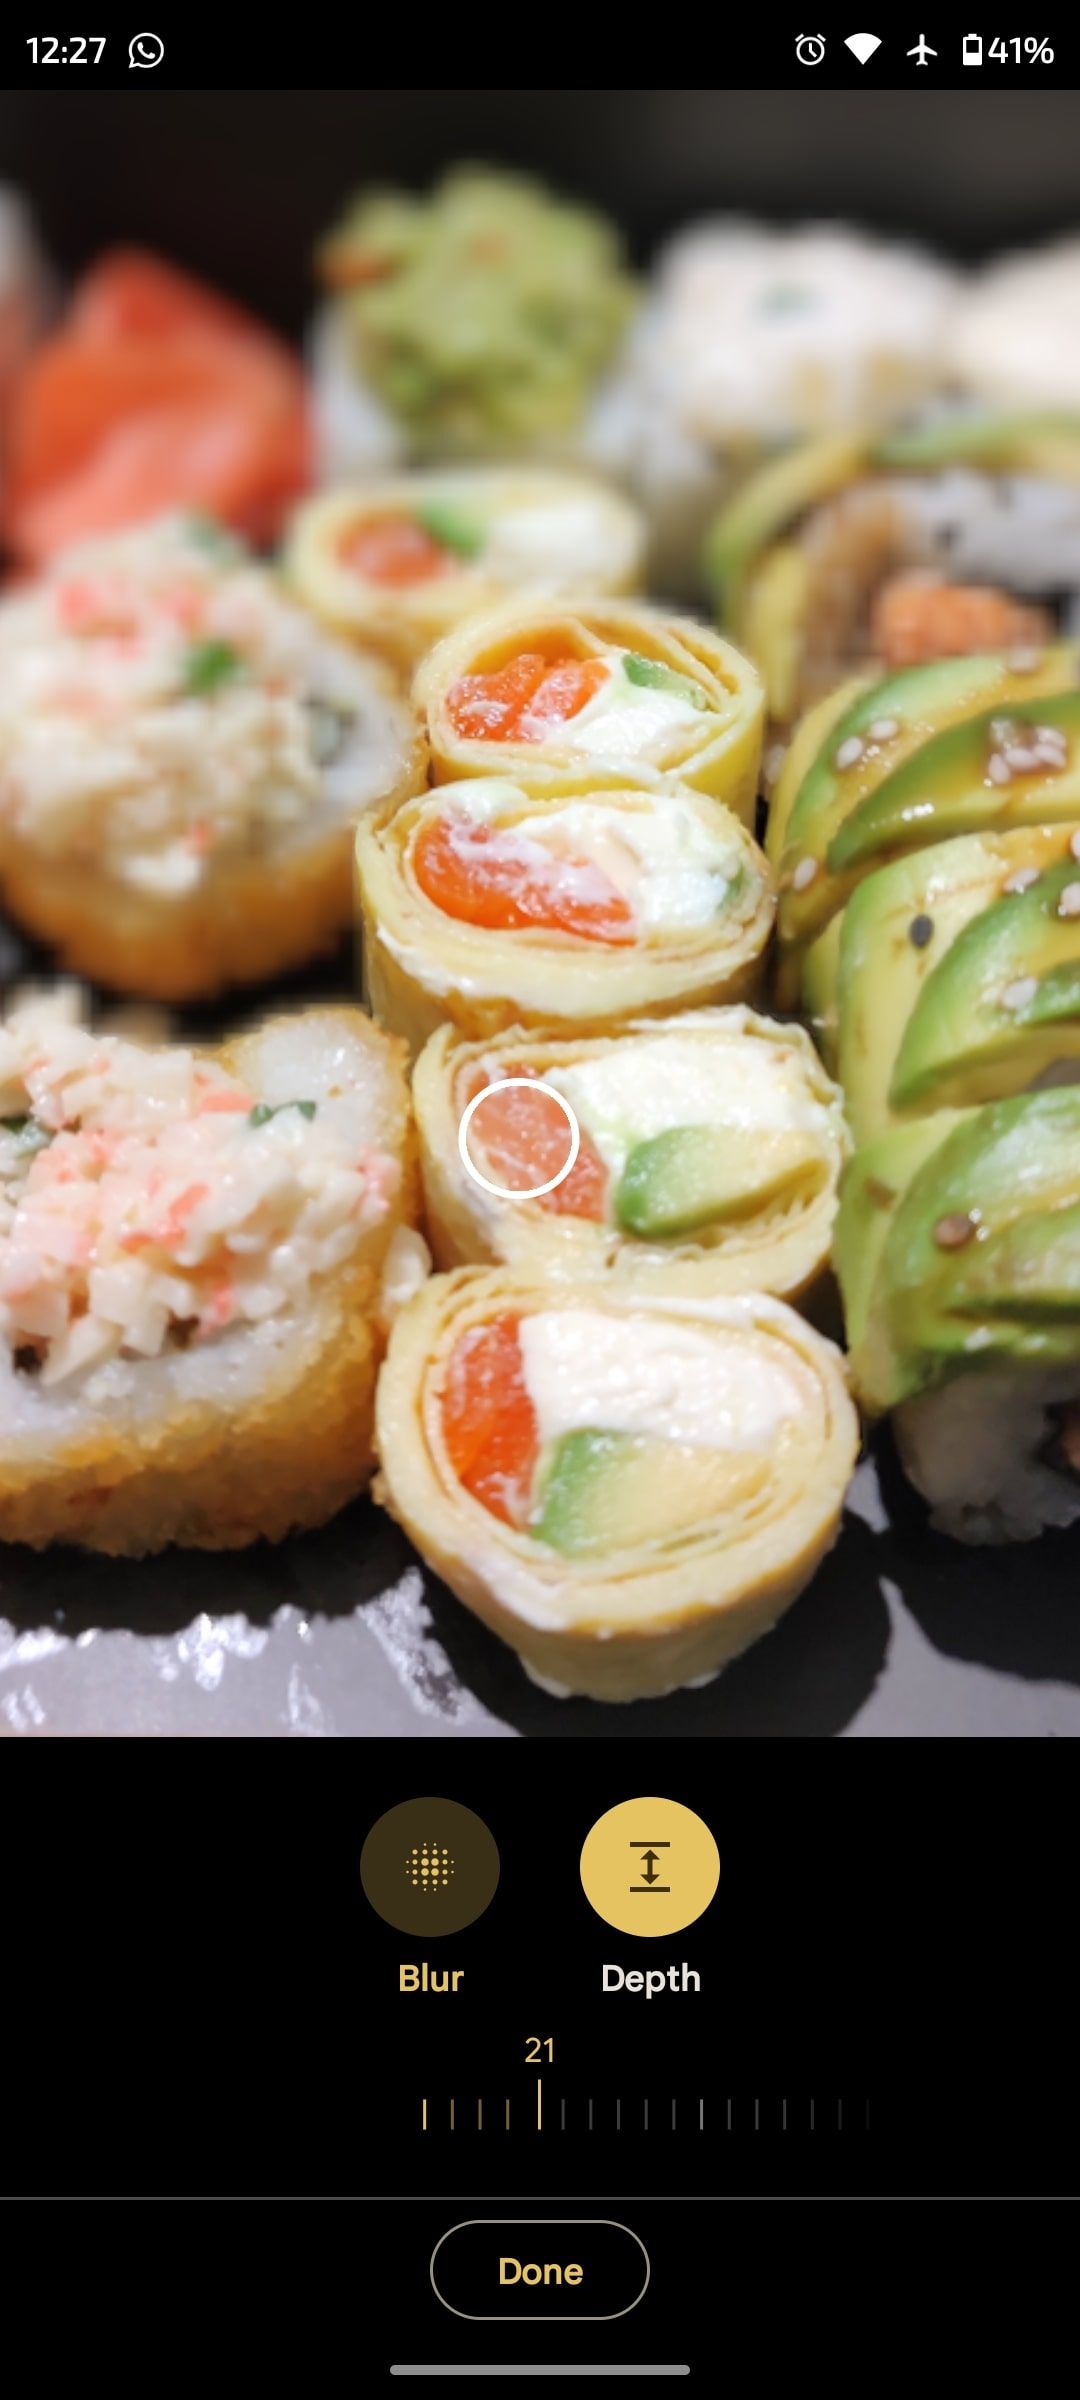 Depth selection being used on a picture of sushi